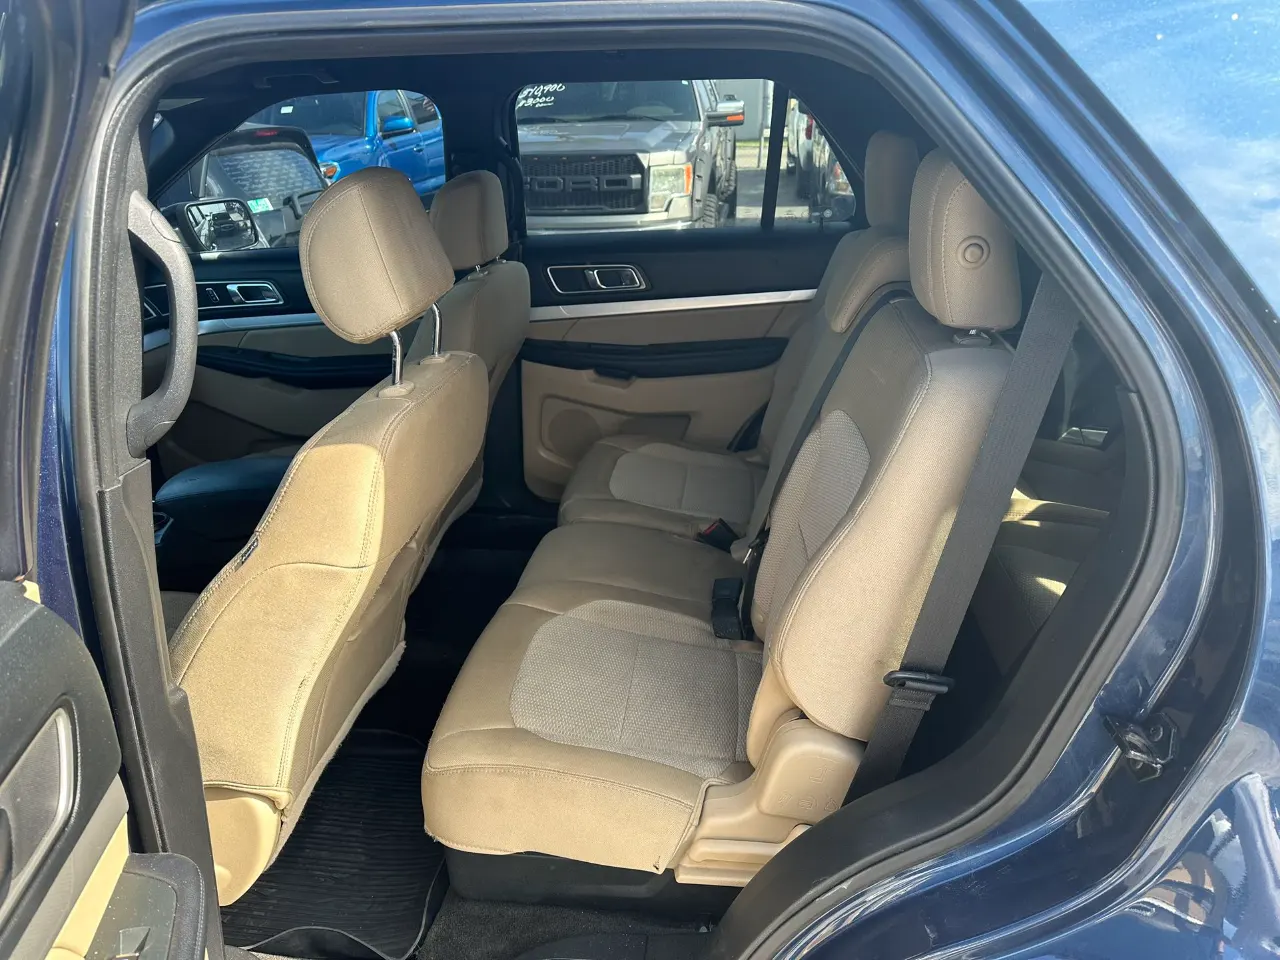 used 2017 Ford Explorer - interior view 2